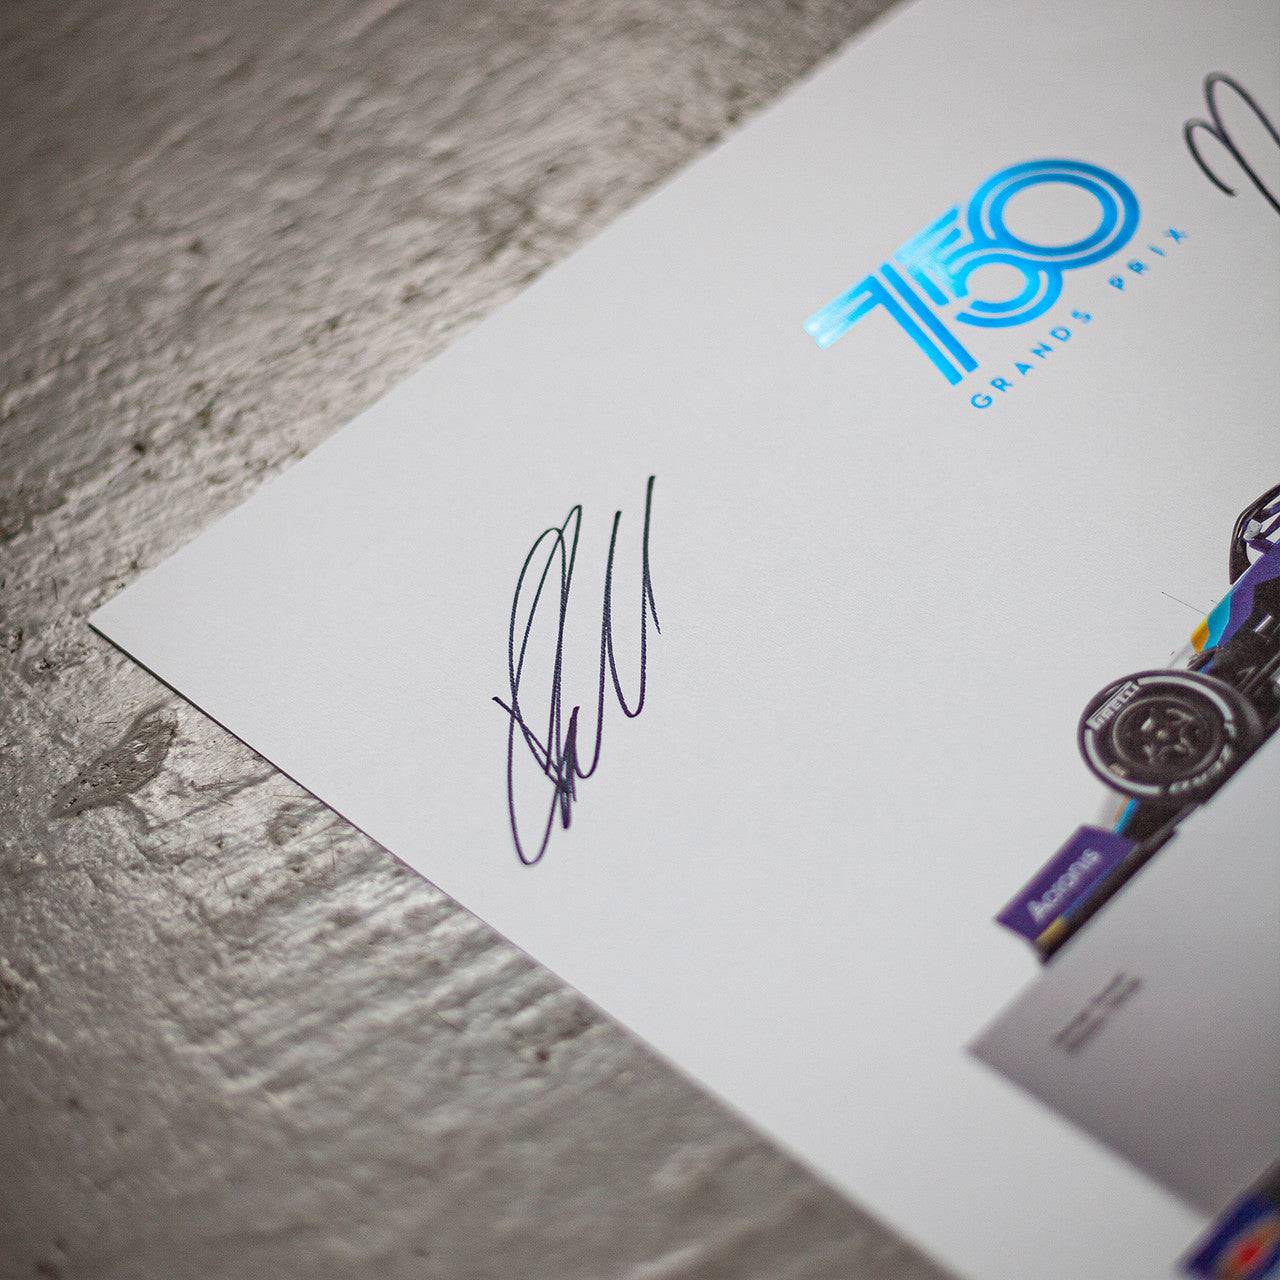 Williams Racing - 750 Grands Prix | Collector’s Edition | Signed